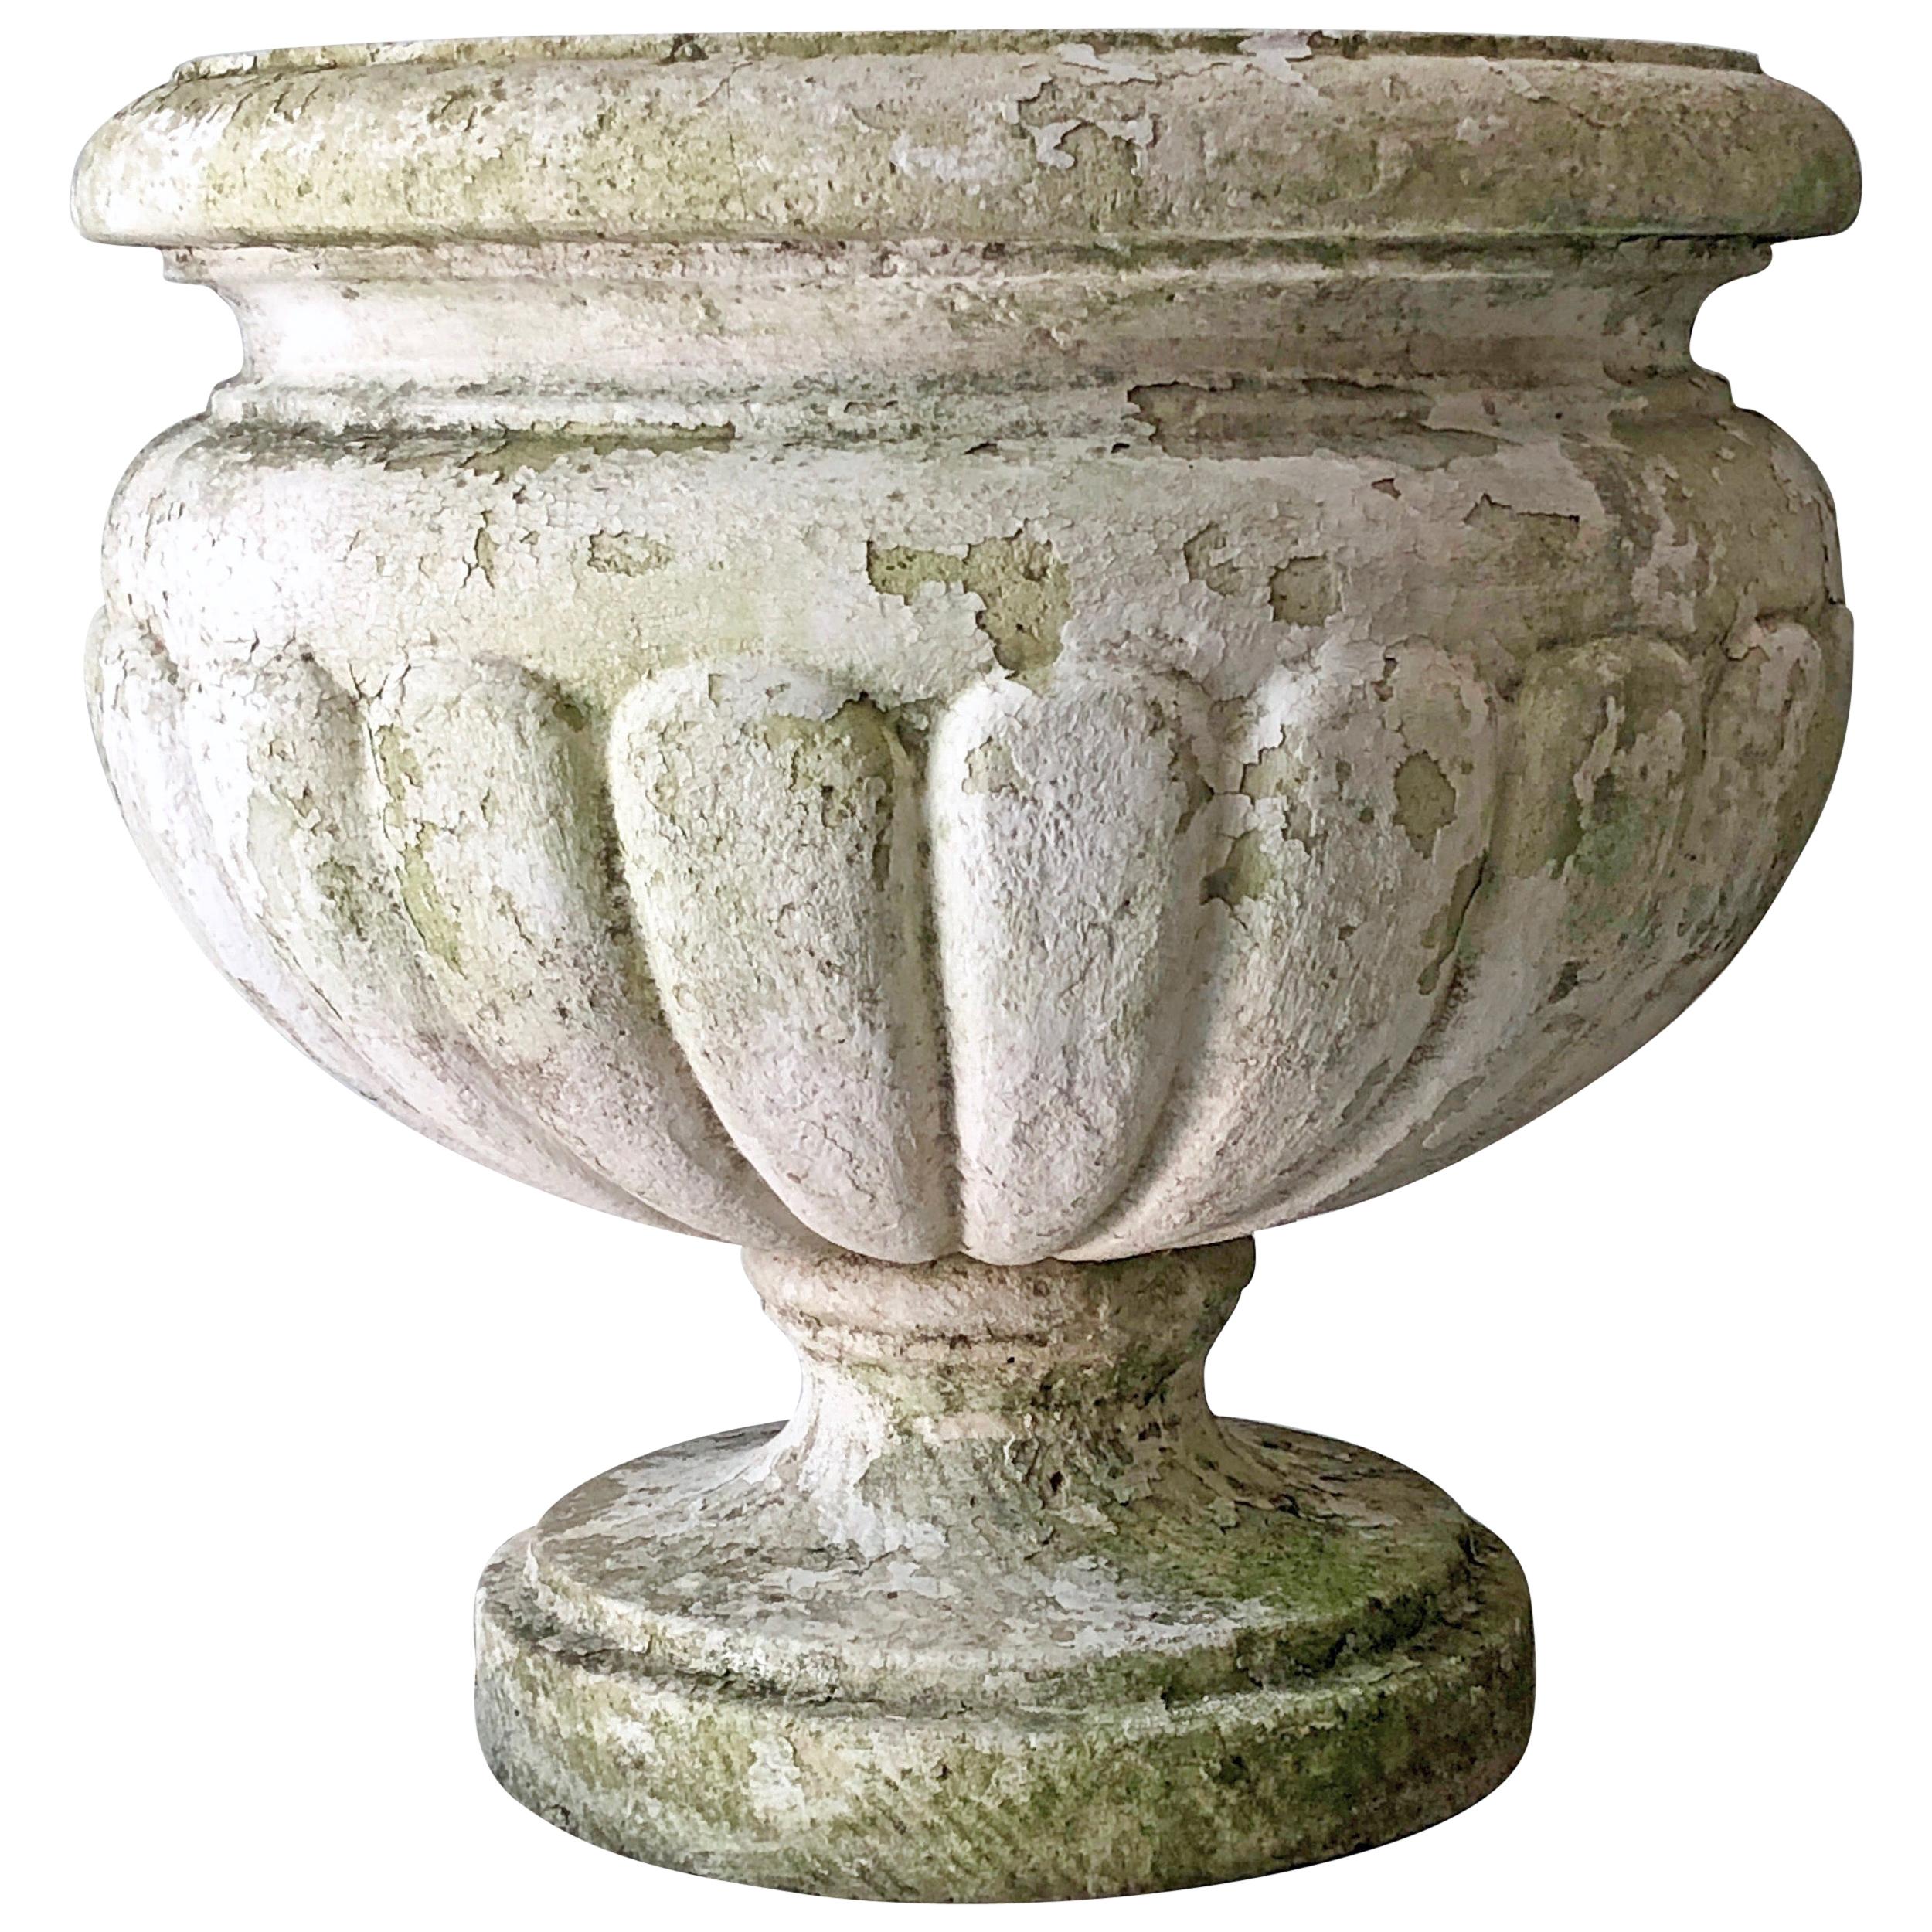 Large 19th Century Two-Piece Patinated and Weathered Stone Jardinière For Sale